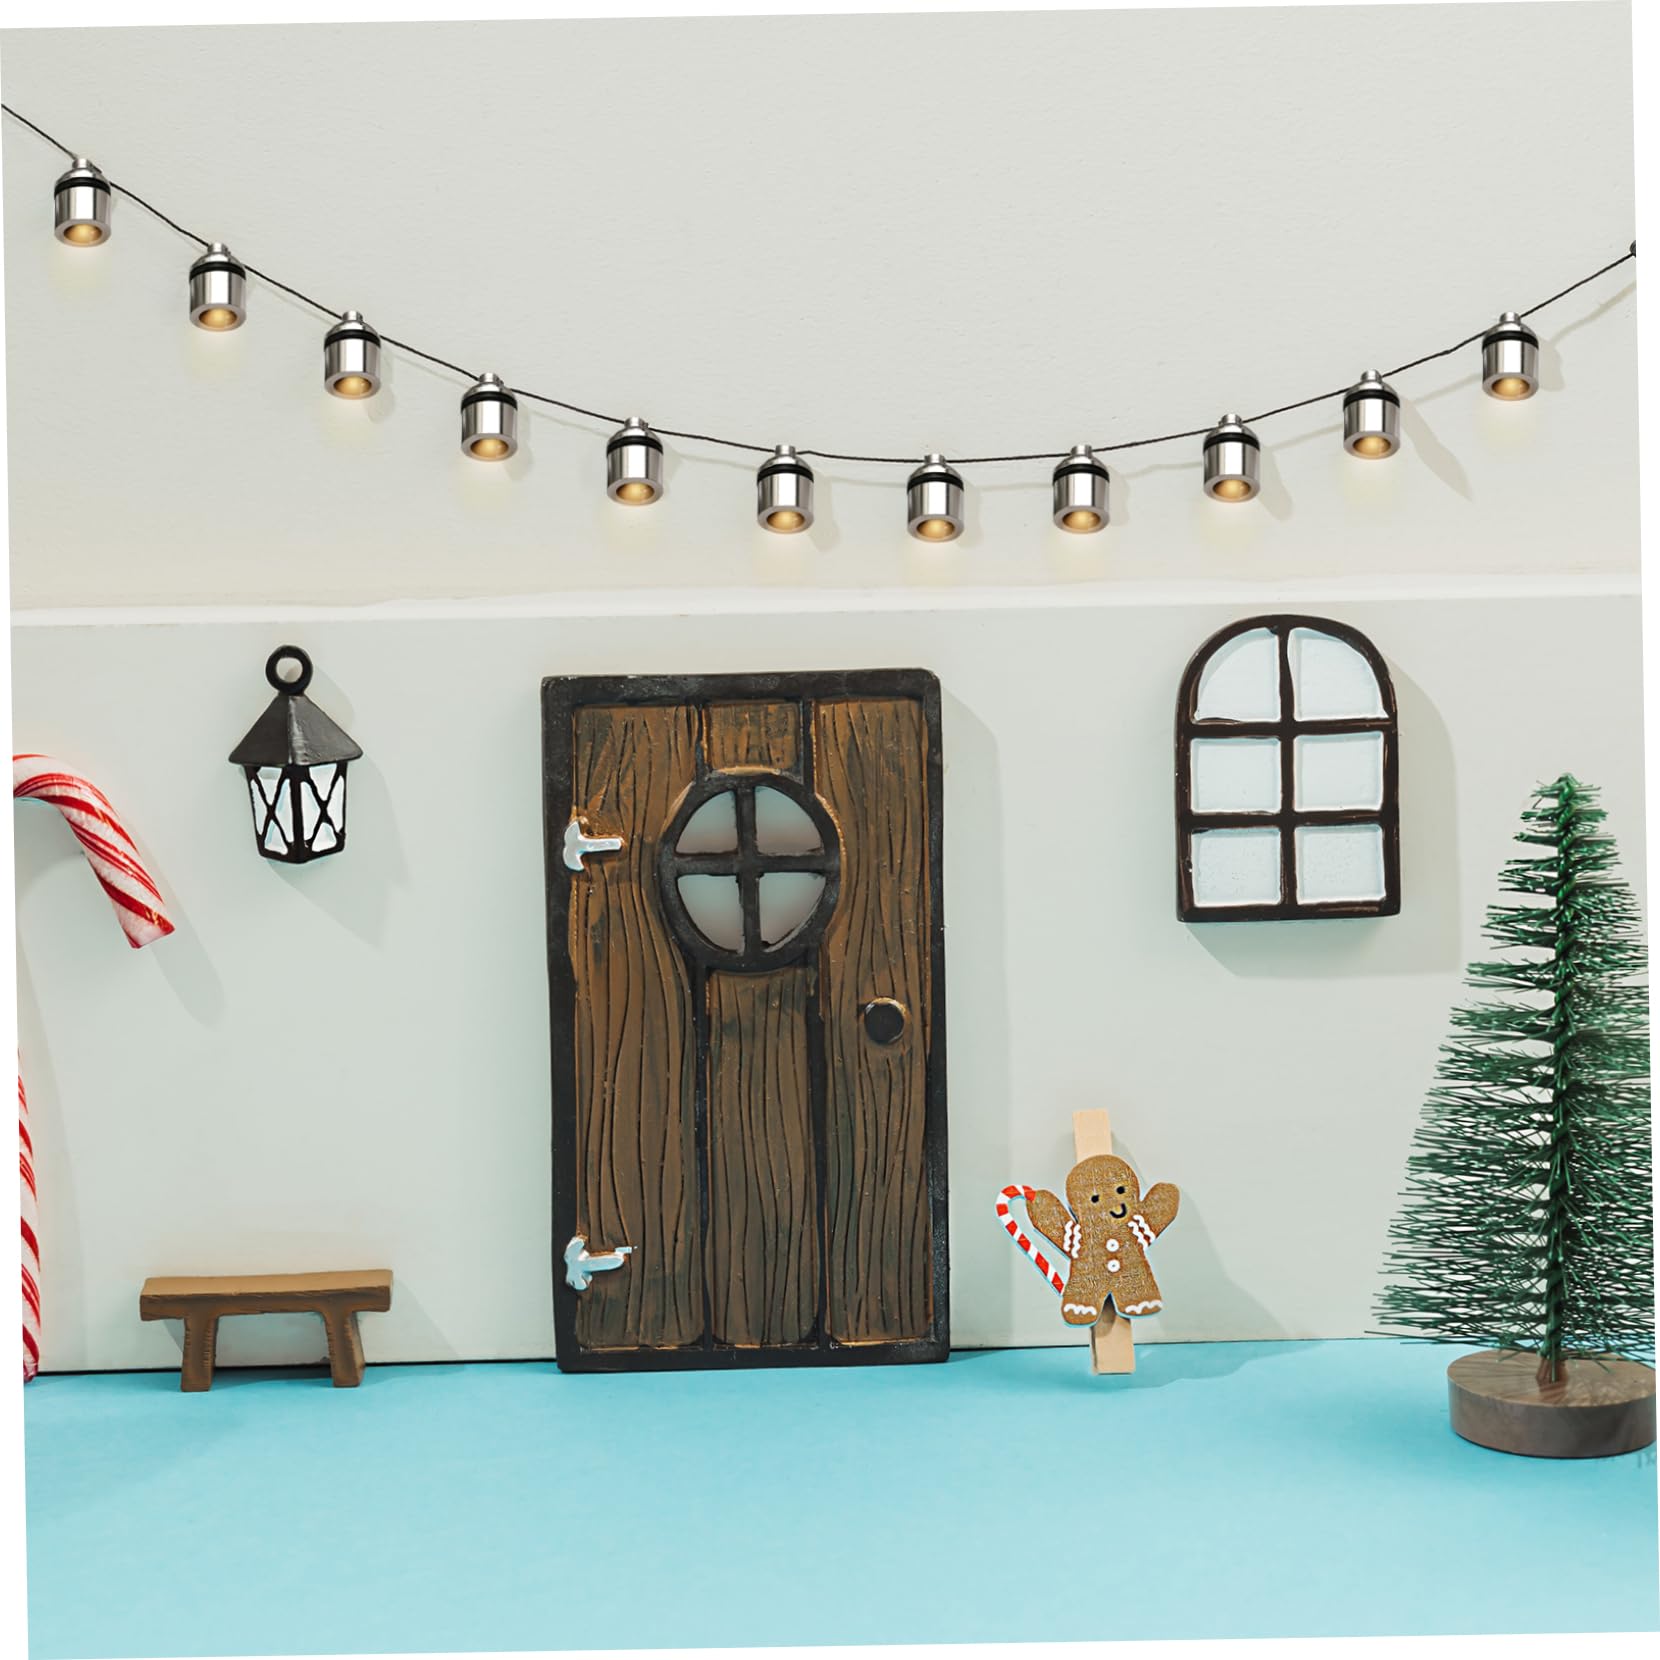 KUYYFDS Dollhouse Lights 10PCS Dolls House Lights Cordless White Miniature LED Lights for Cat Claw Lamp Battery Operated Tiny Lights for Crafts White